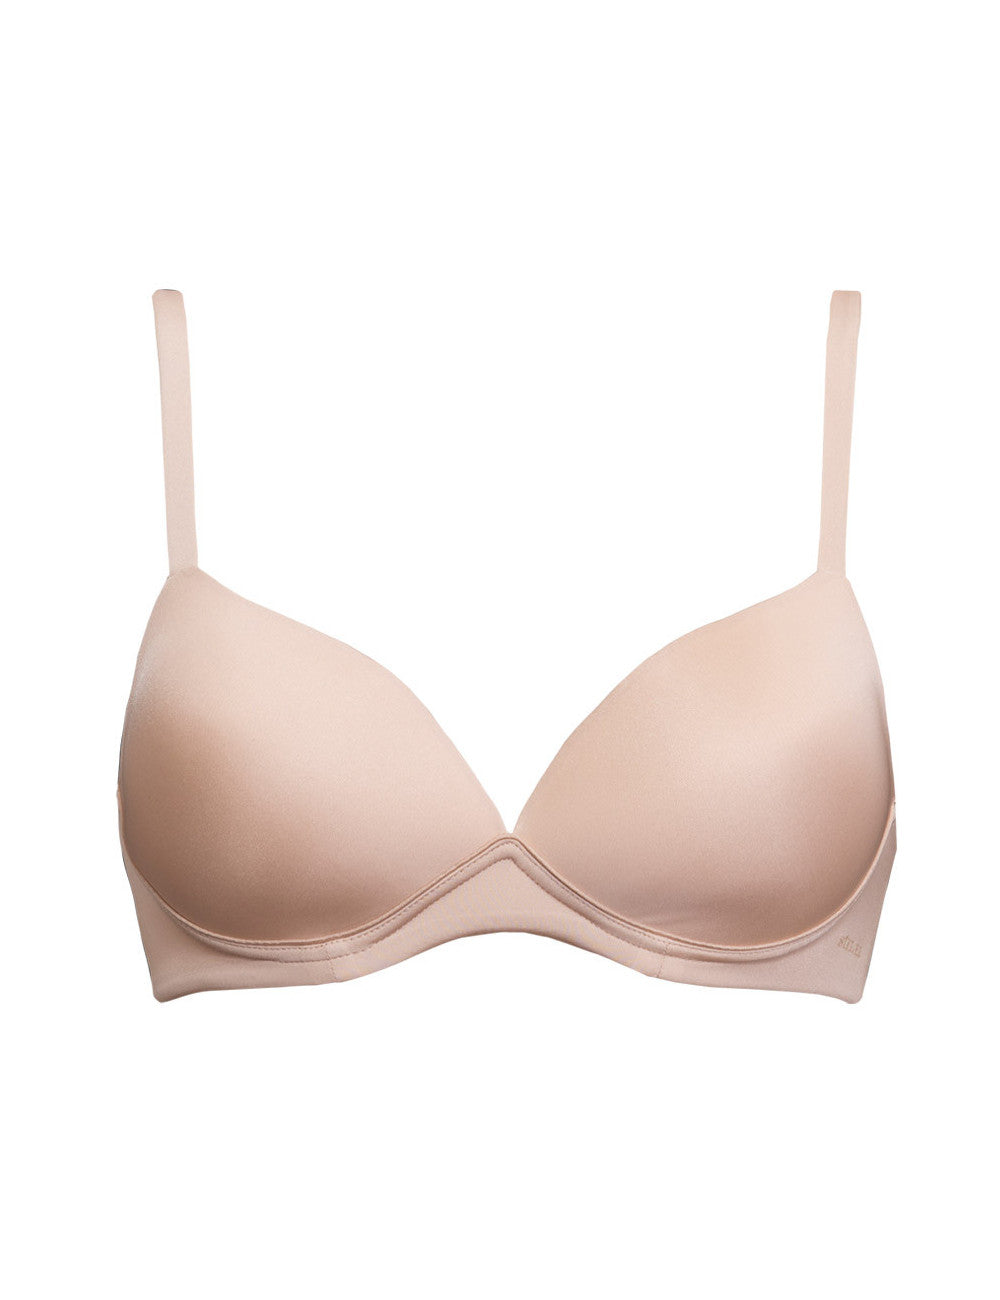 SièLei French Bra with Invisible Underwire